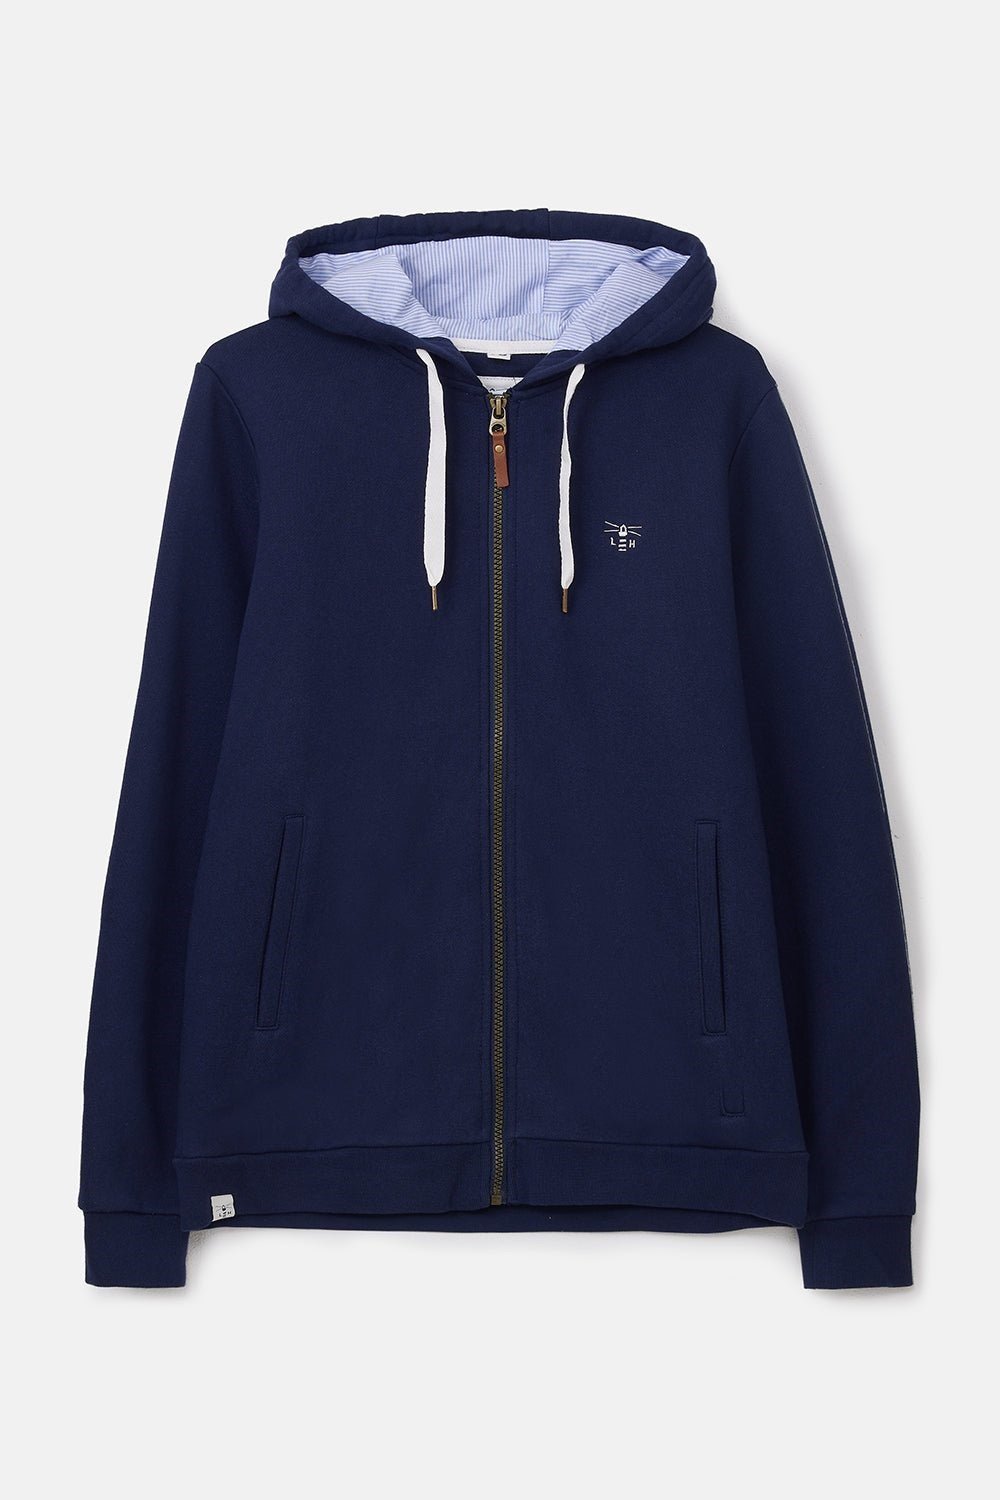 Womens Strand Hooded Top -